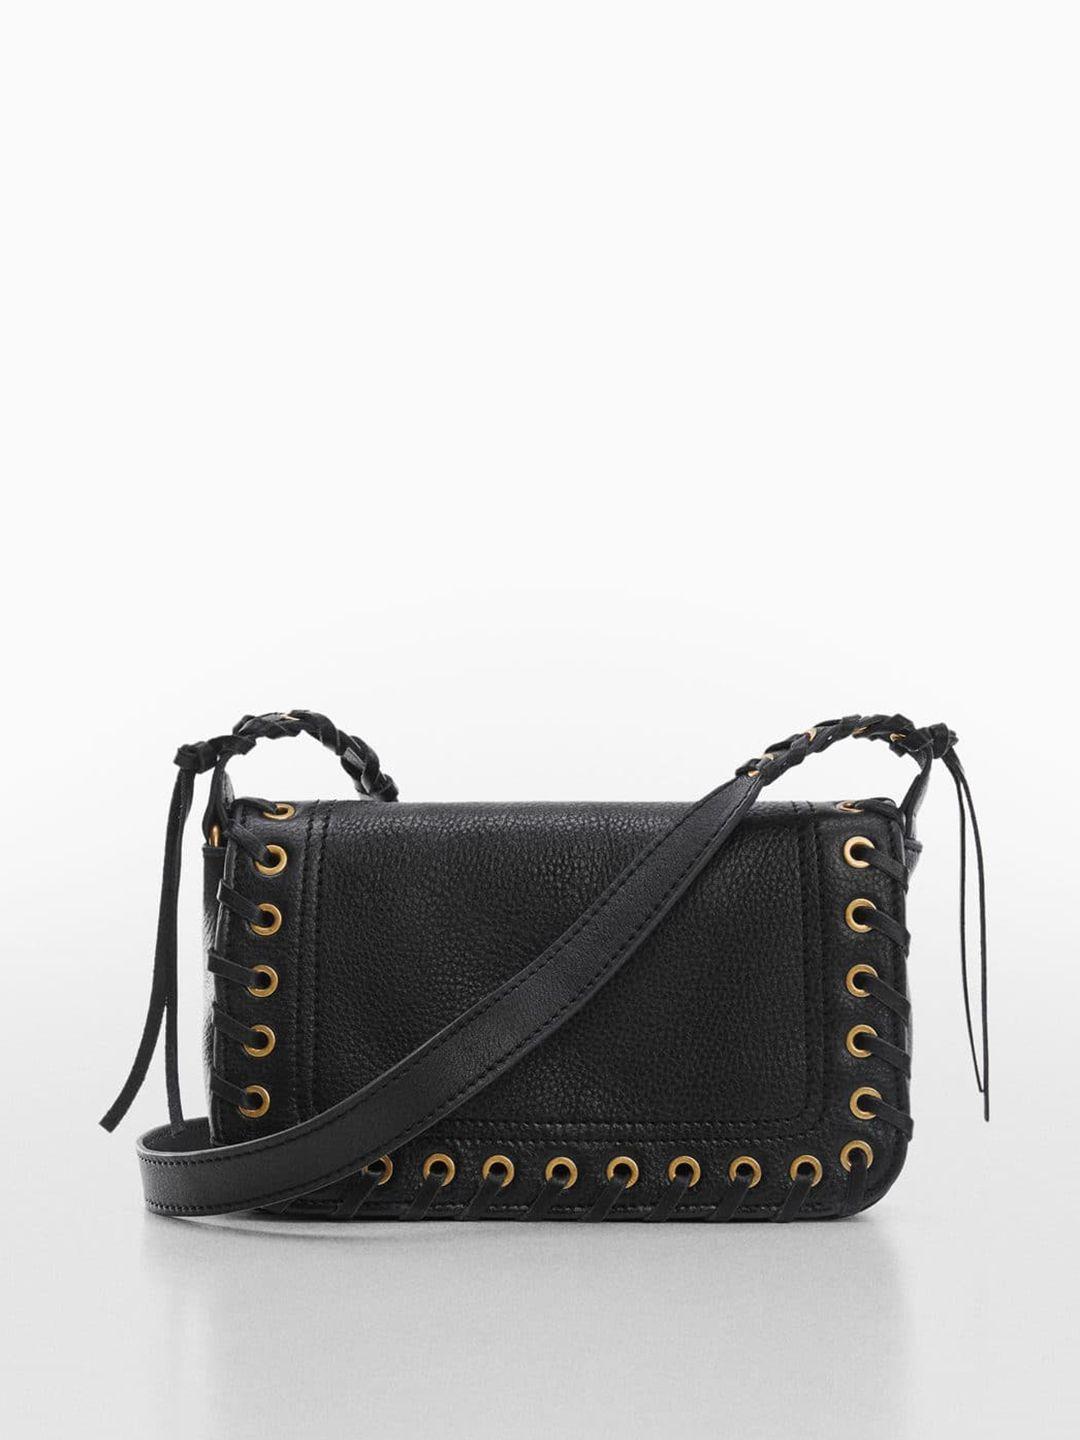 mango leather structured sling bag with rivet detail